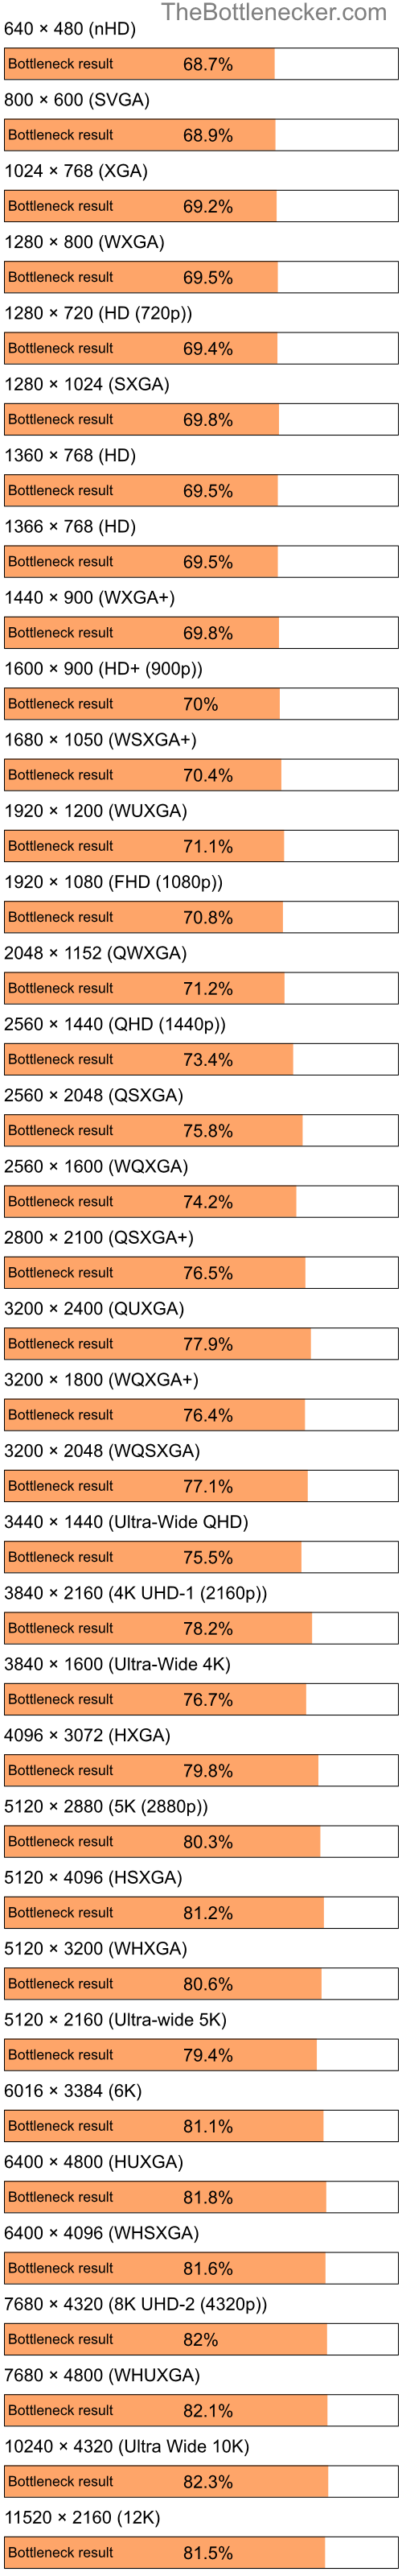 Bottleneck results by resolution for Intel Pentium 4 and NVIDIA GeForce 6600 in Graphic Card Intense Tasks